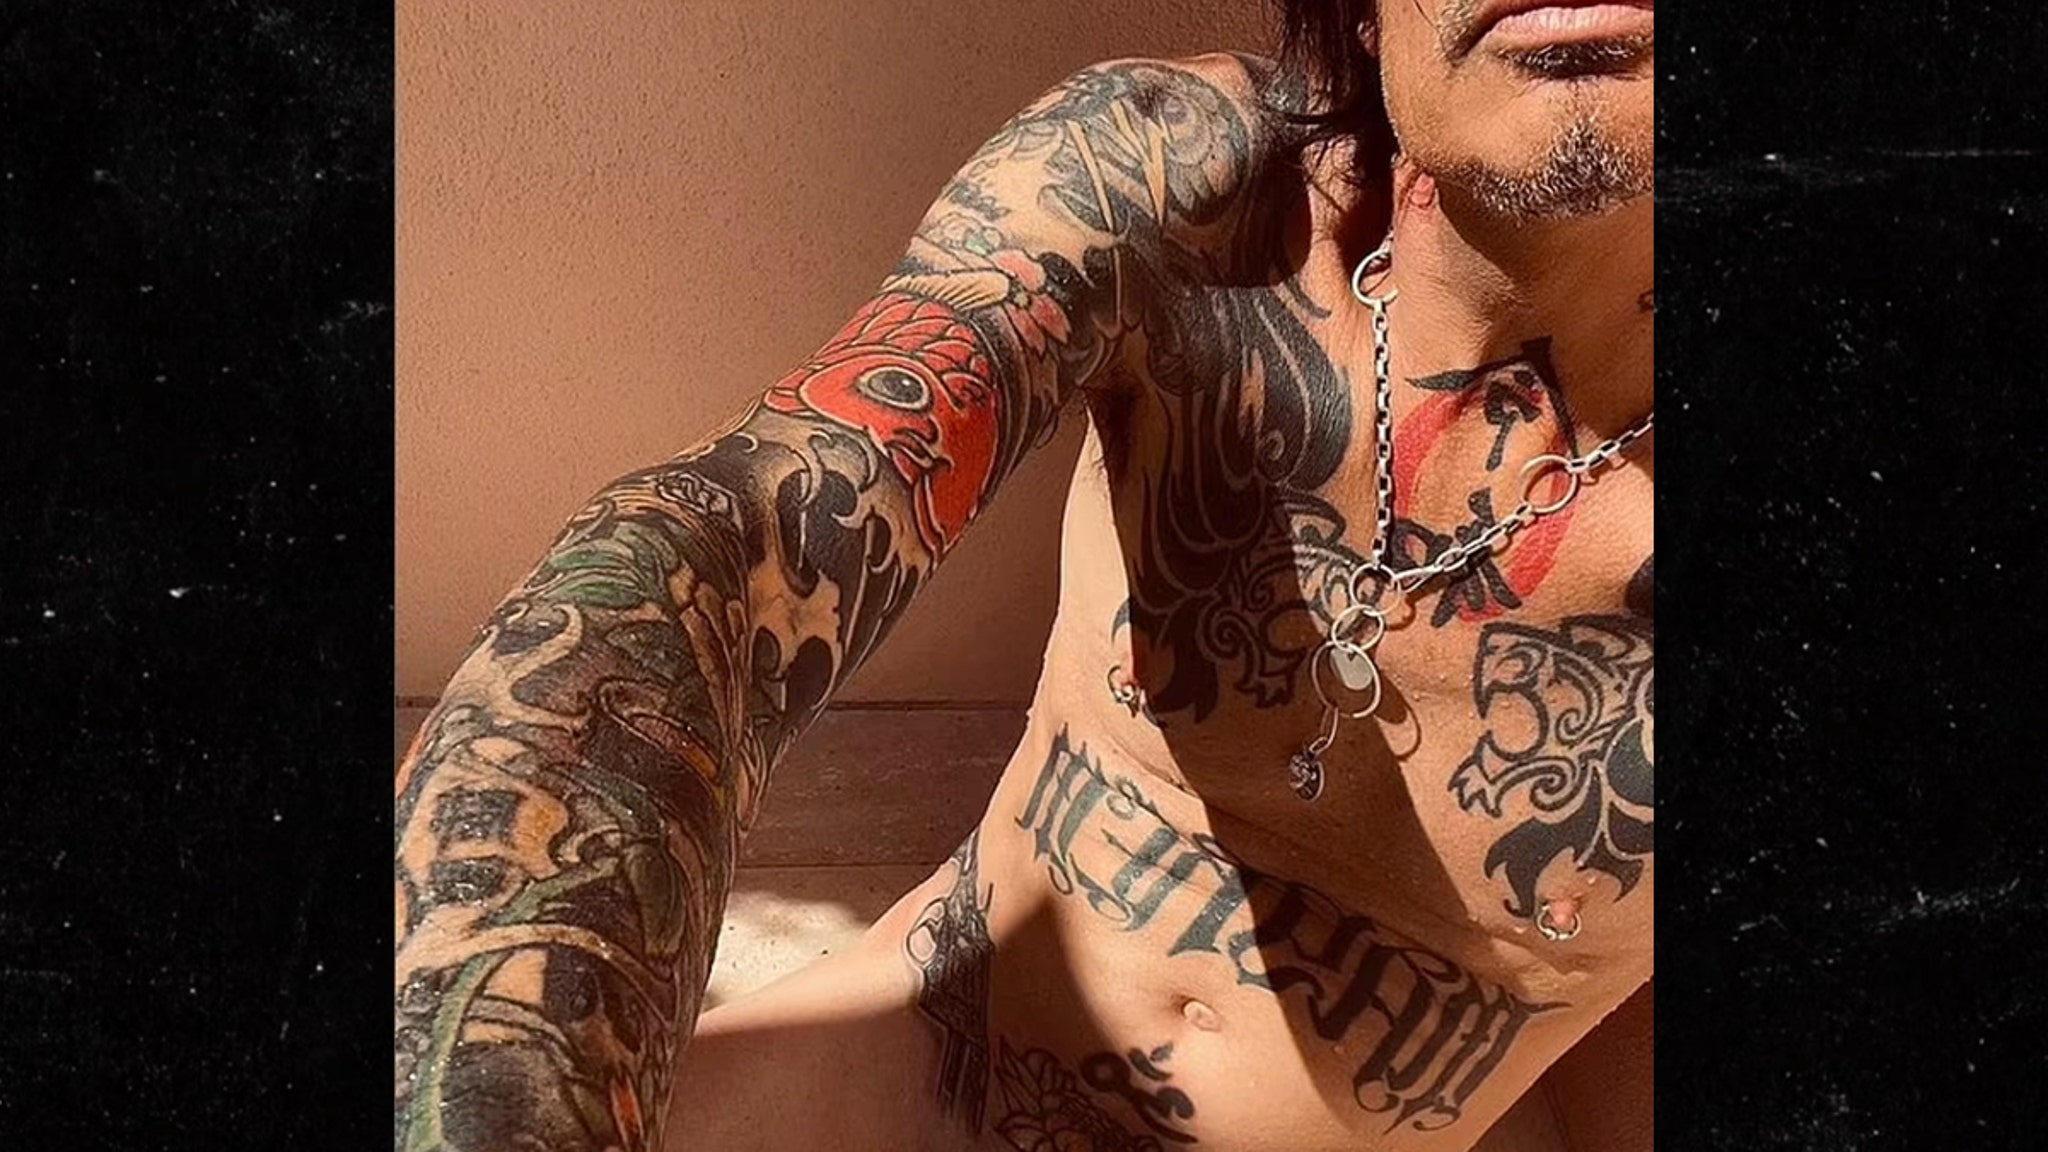 Tommy Lee Post Full Frontal Nude Pic On Instagram, Fans Shocked - reporterw...